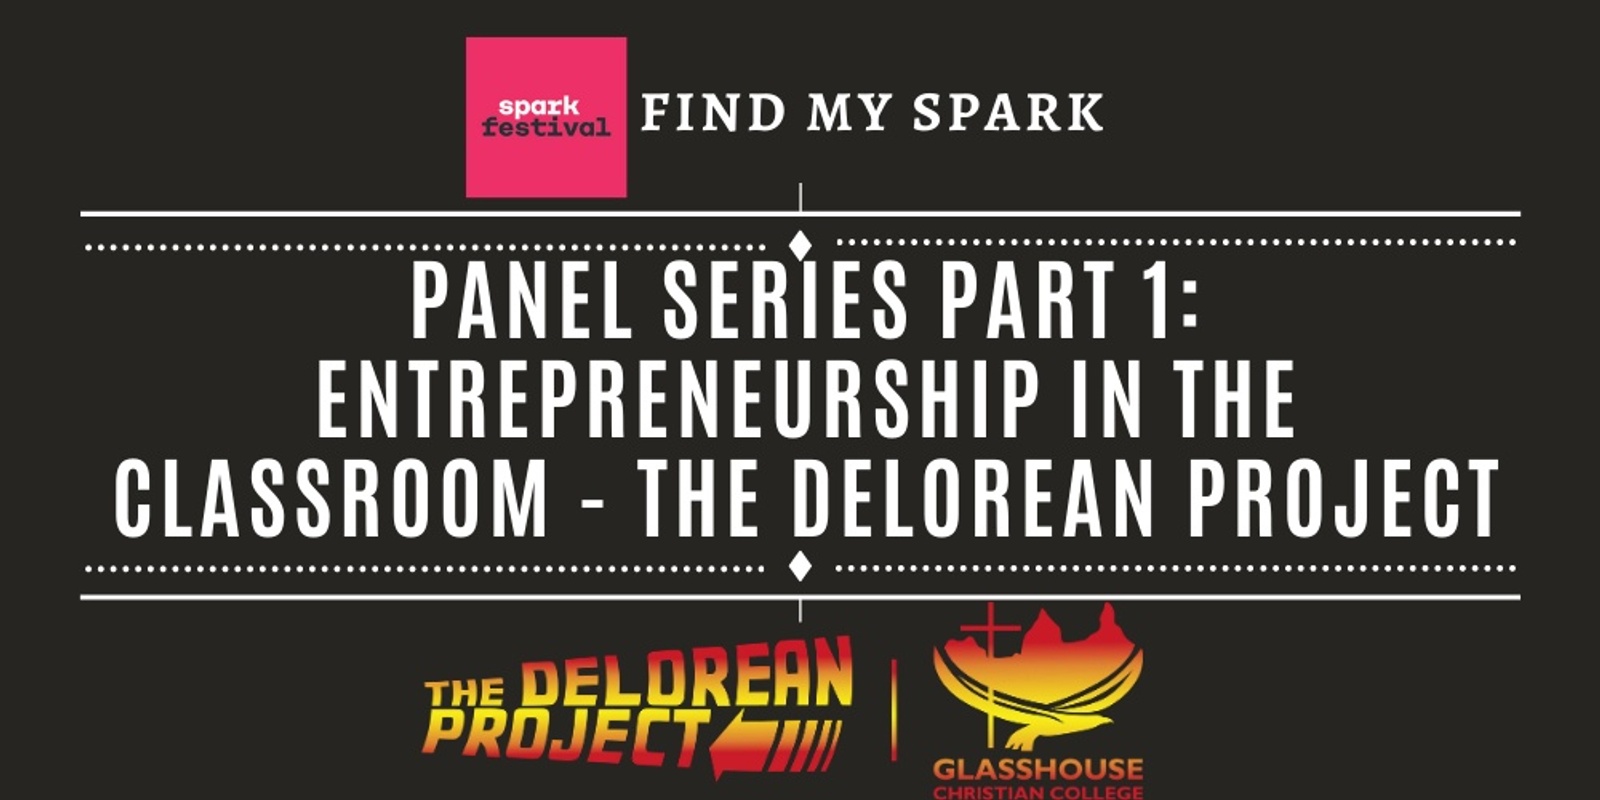 Banner image for Spark Festival - Part 1 Panel Series: Entrepreneurship in the Classroom - The Delorean Project